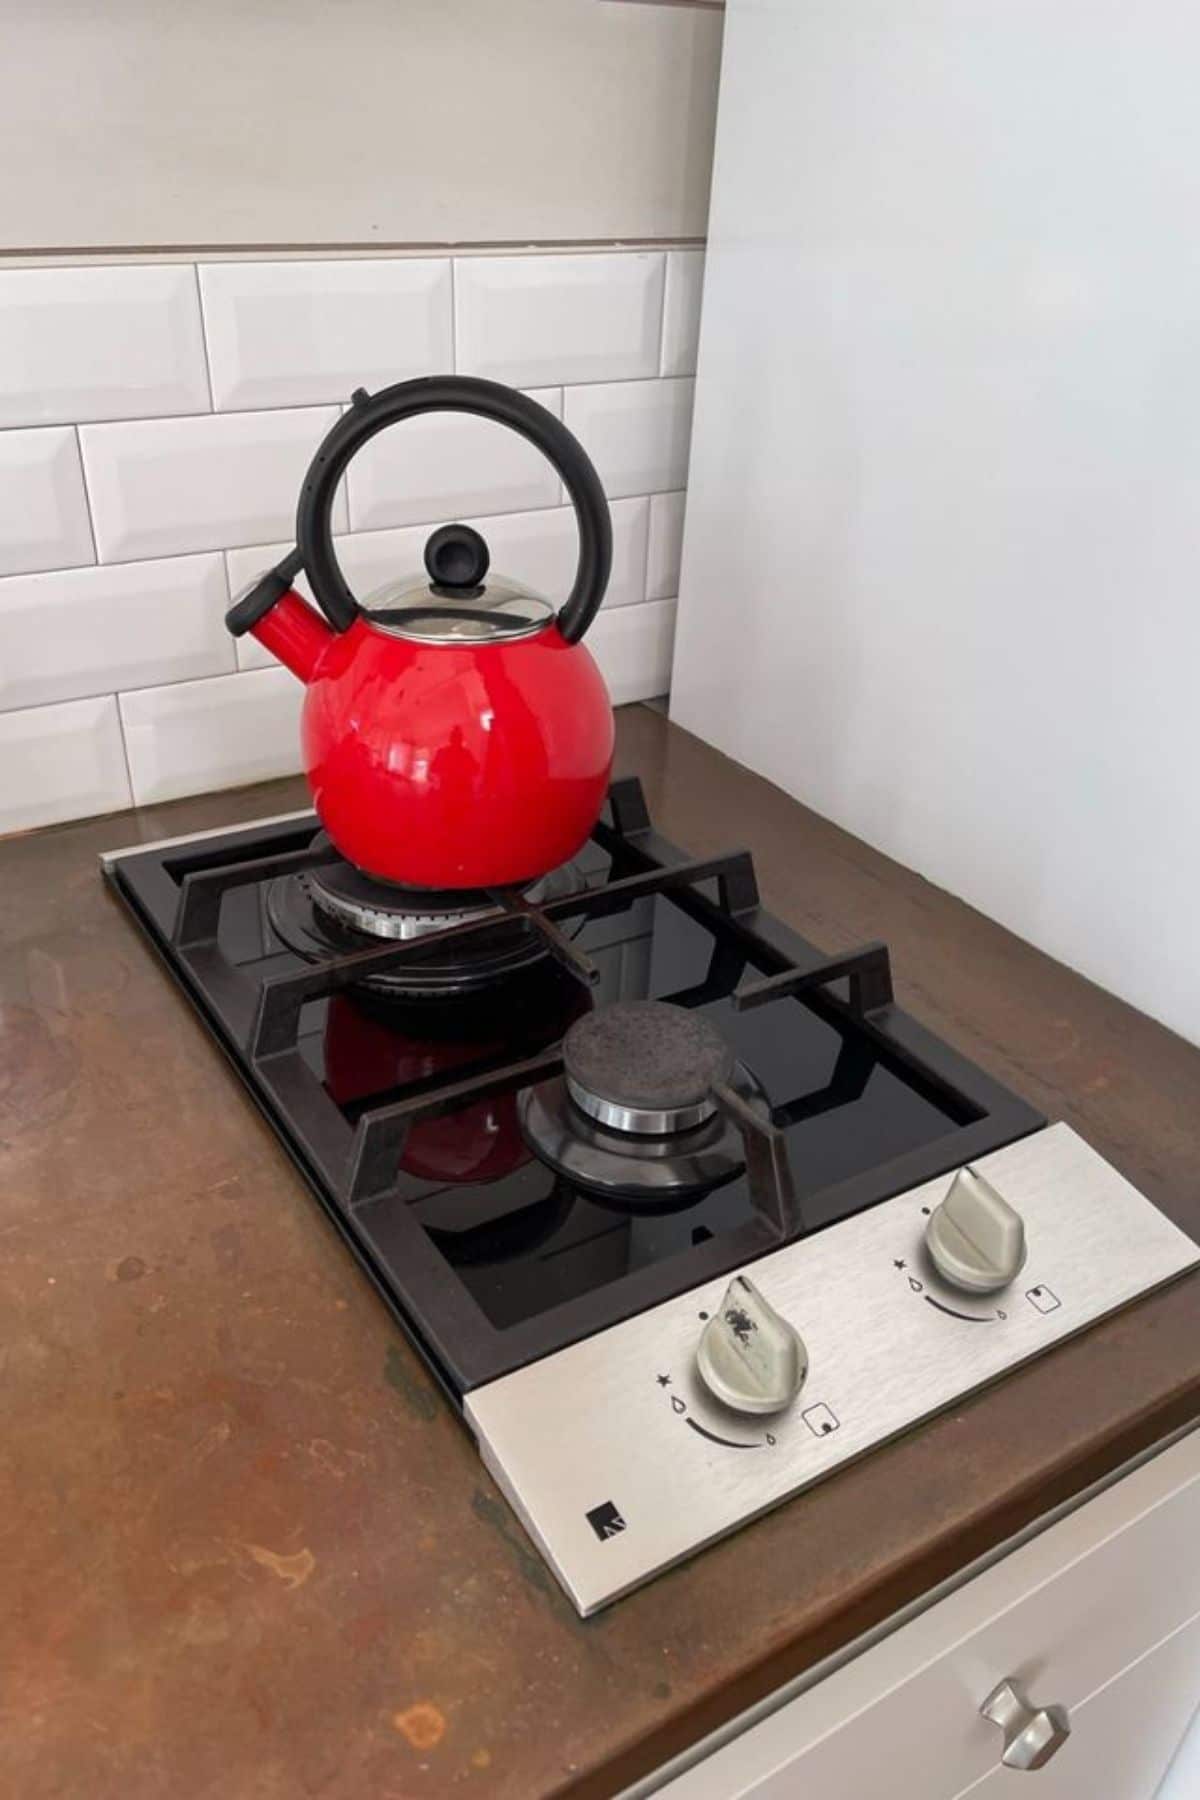 two burner gas cooktop with stainless steel knobs and red kettle on the back